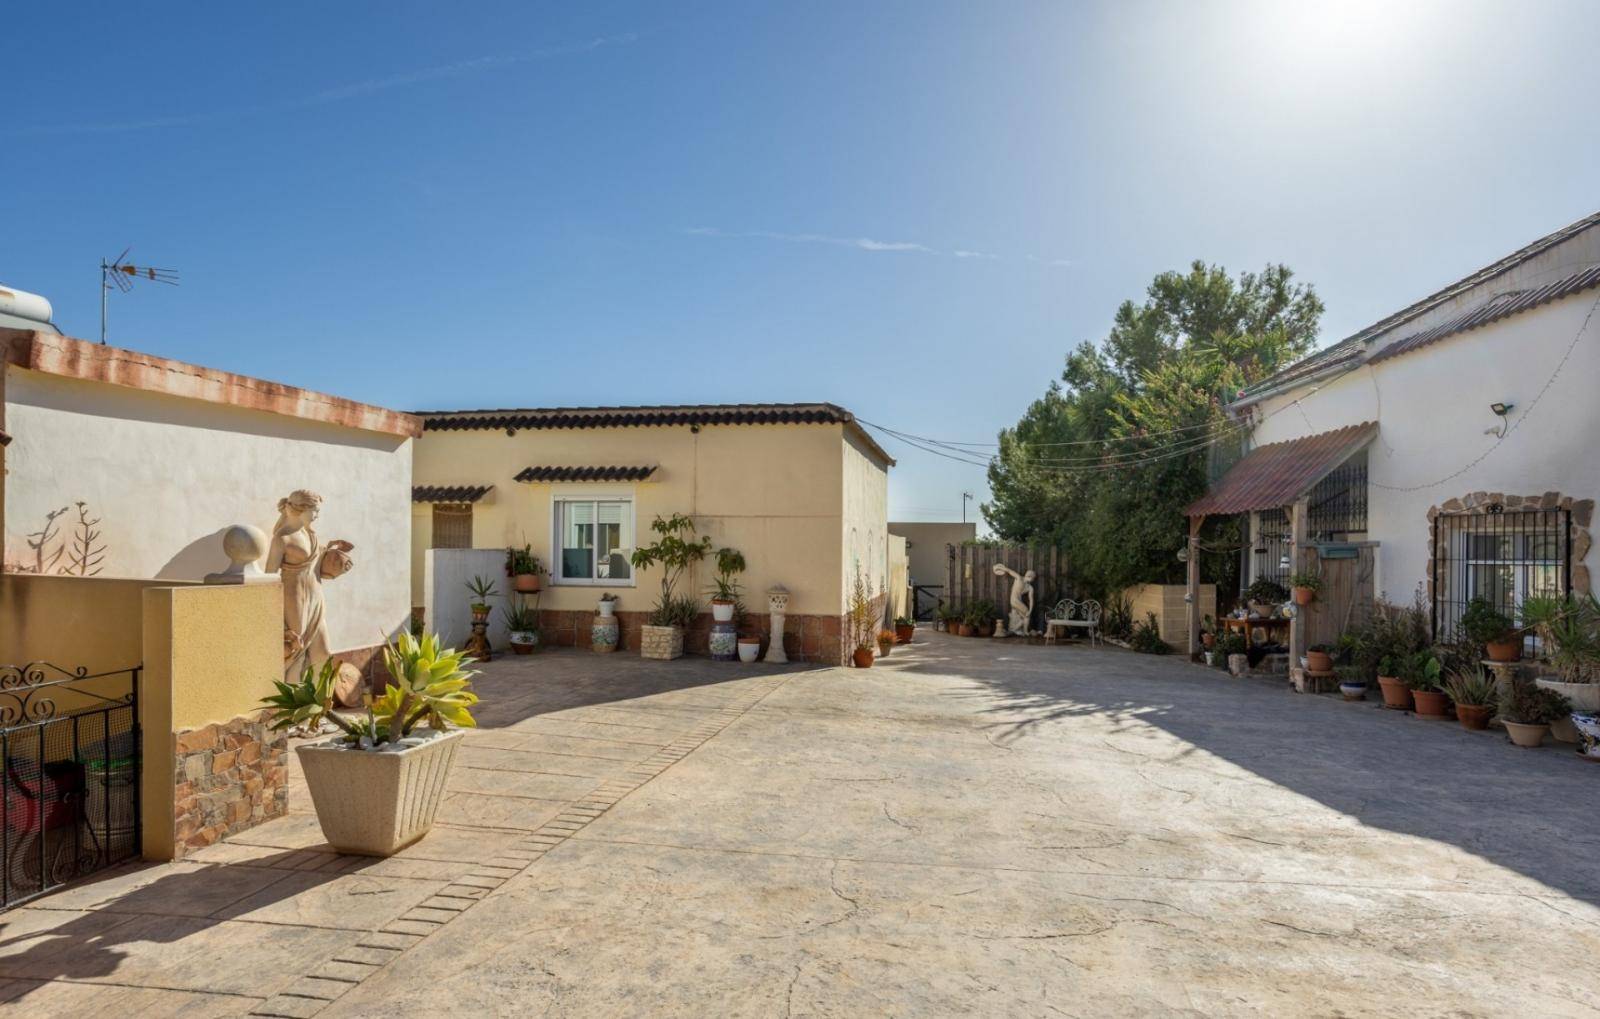 EQUESTRIAN PROPERTY IN FORTUNA WITH 5 APARTMENTS - MAIN HOUSE AND STABLES